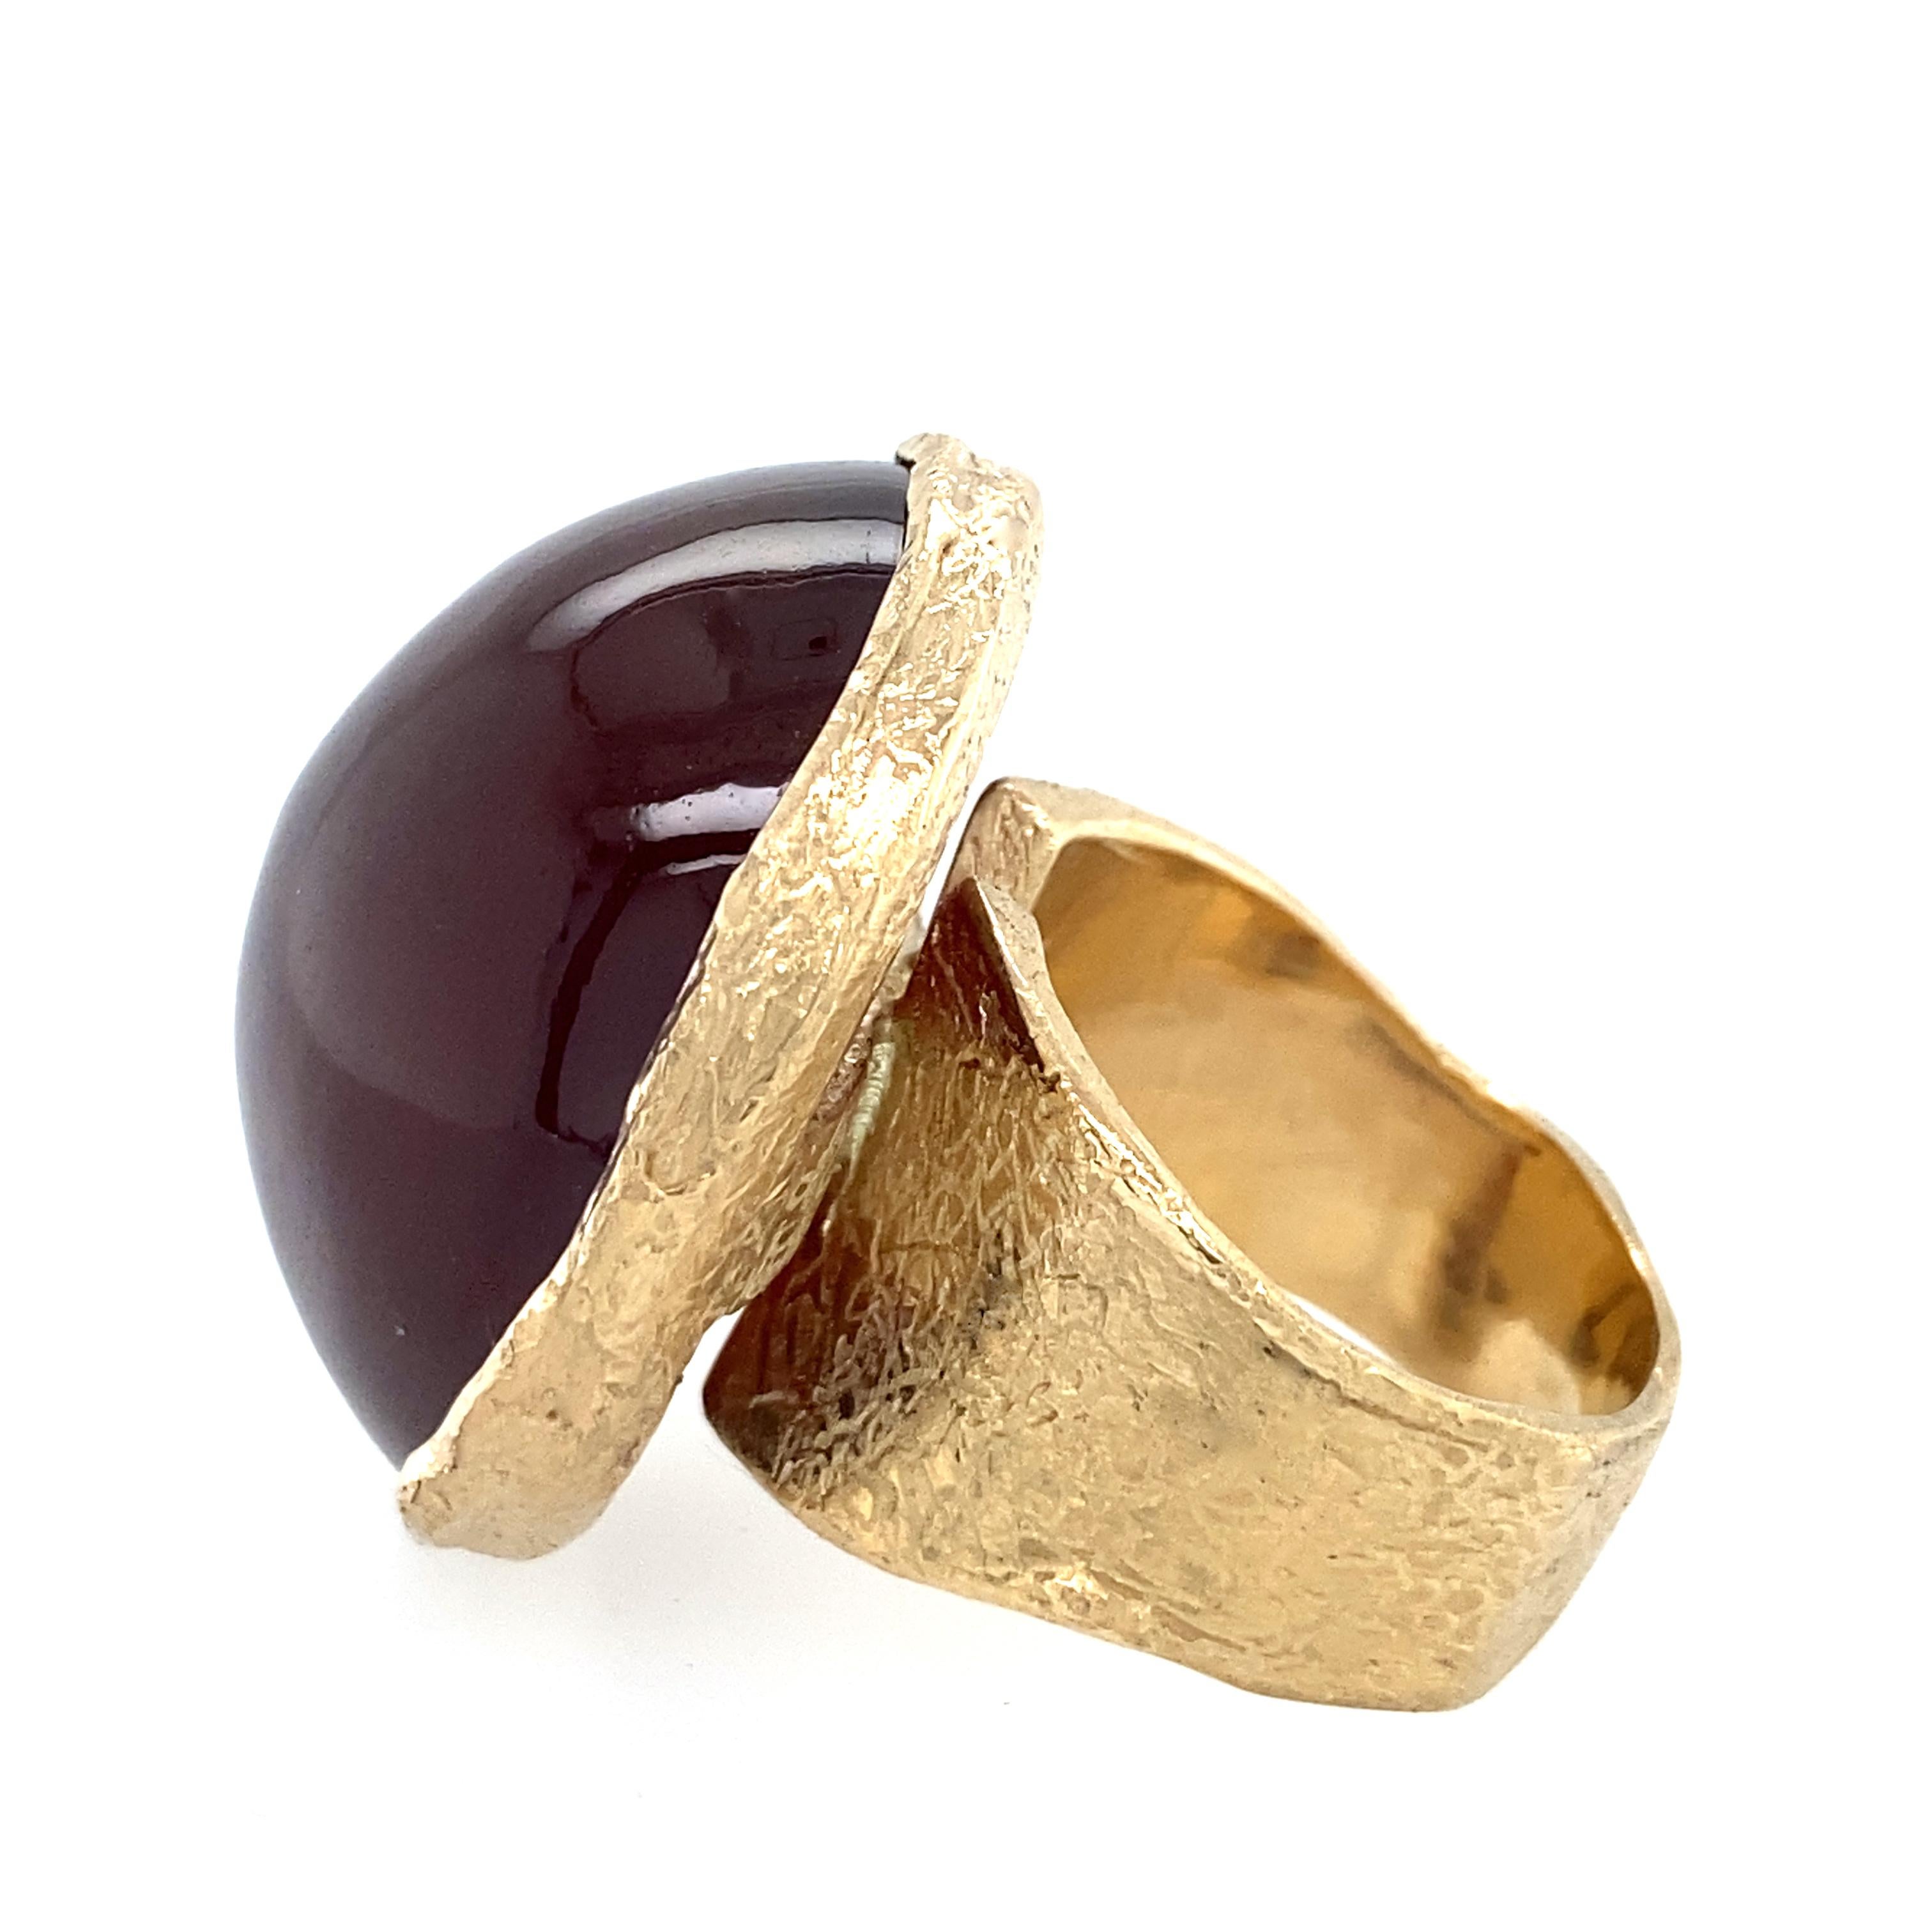 Oversized Modern Cocktail Ring with 95 Carat Almandine Garnet in Yellow Gold 4